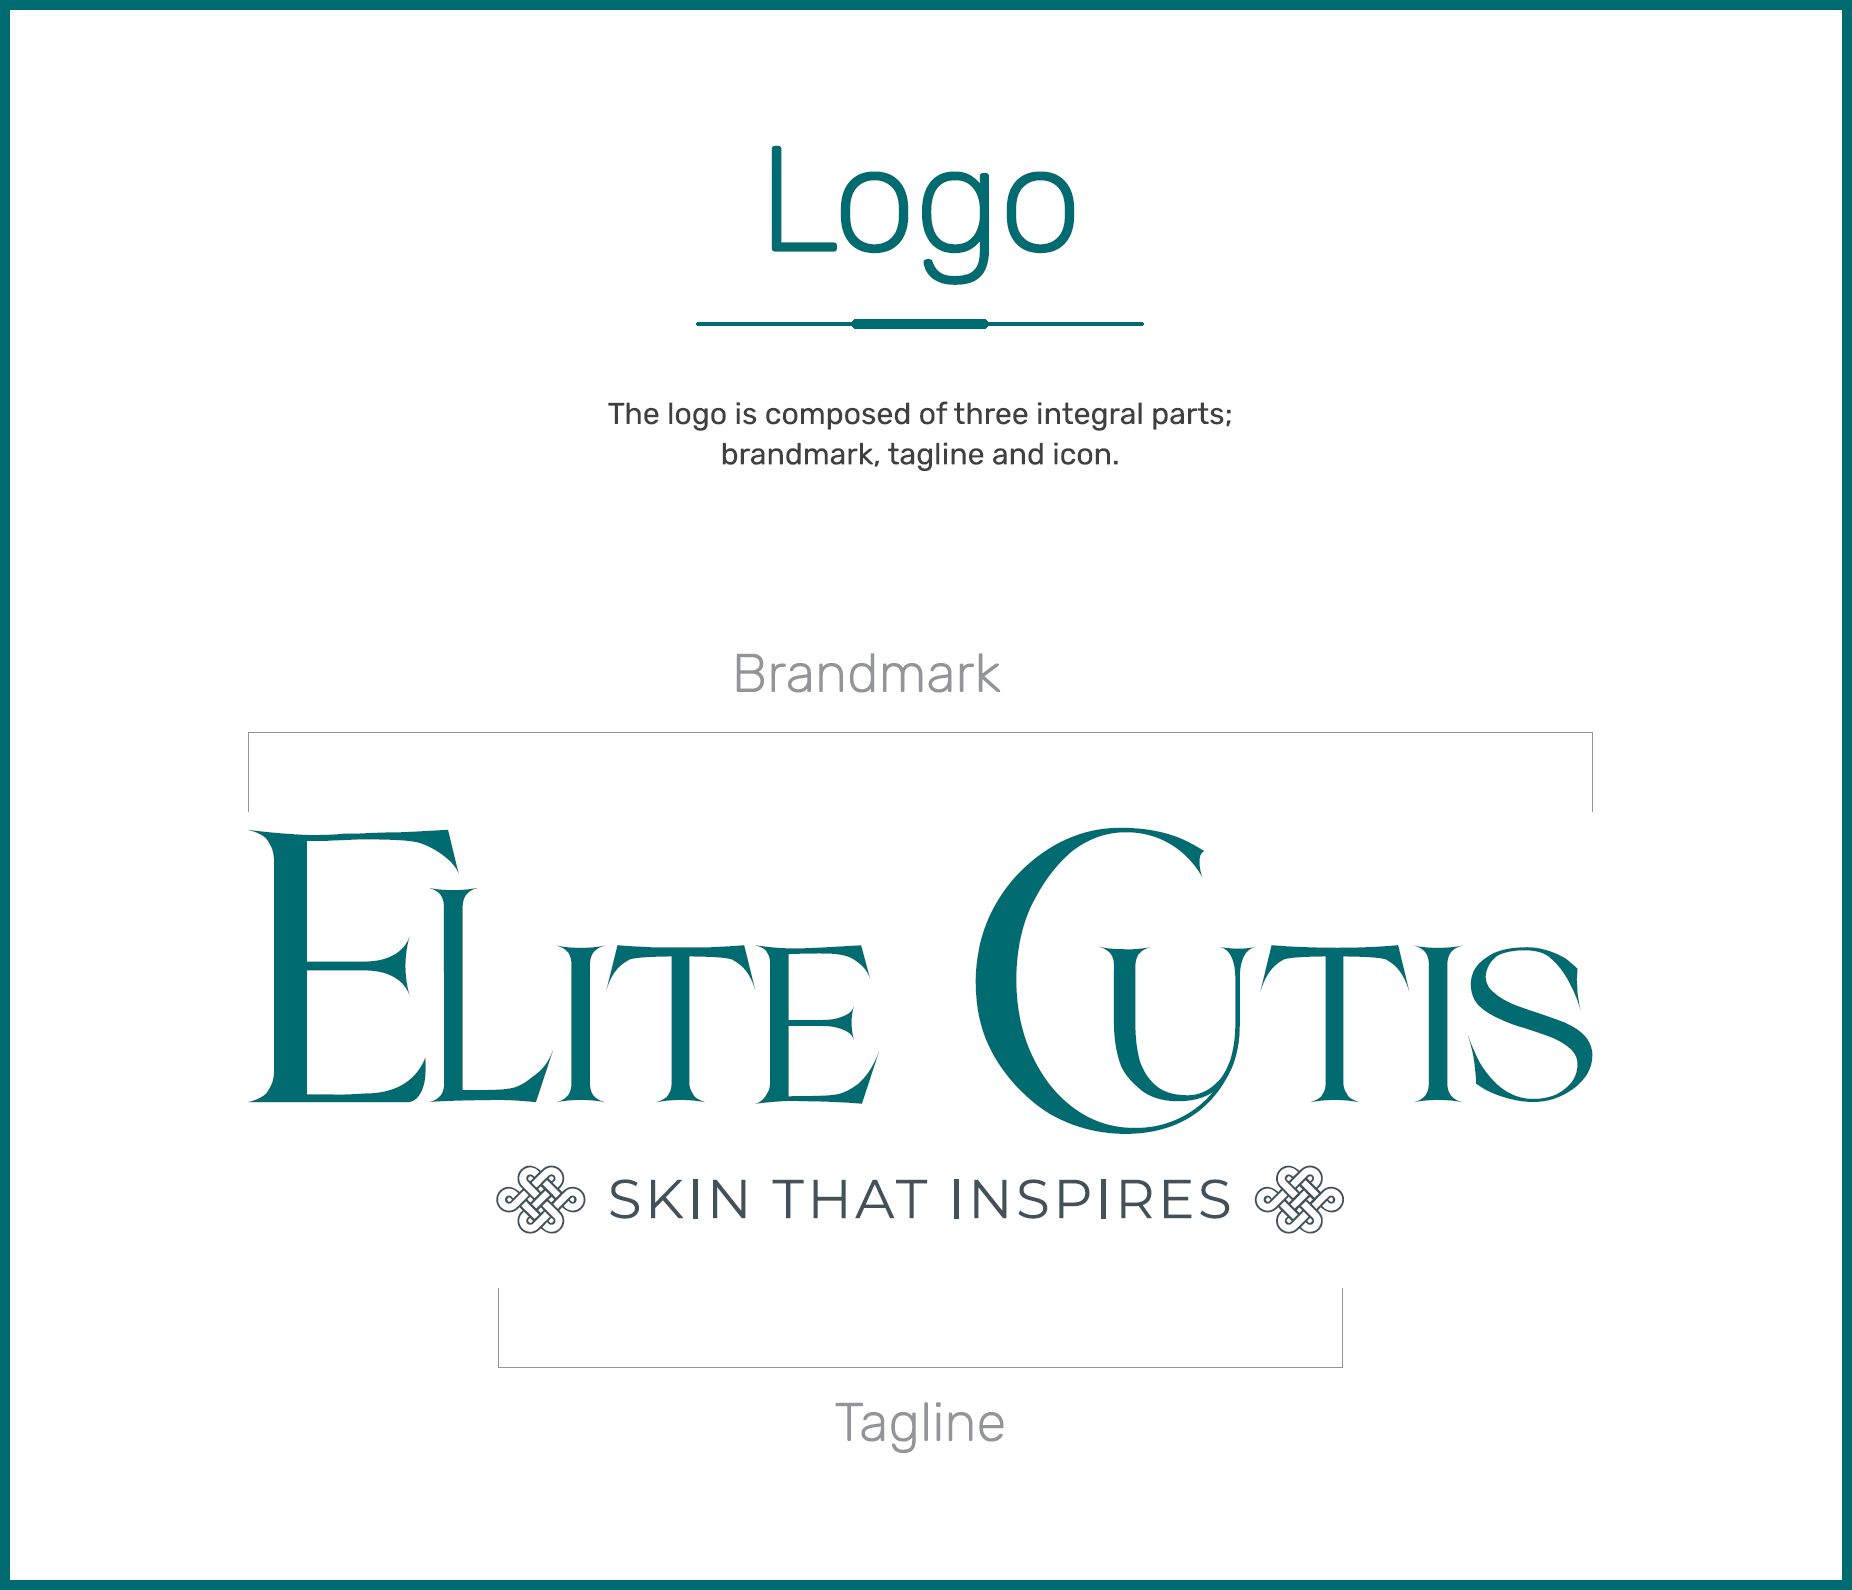 <h5></h5>
<p><!--more--></p>
<h5 style="text-align: center;"><strong>ELITE CUTIS</strong><br />
(Cosmetic Clinic)</h5>
